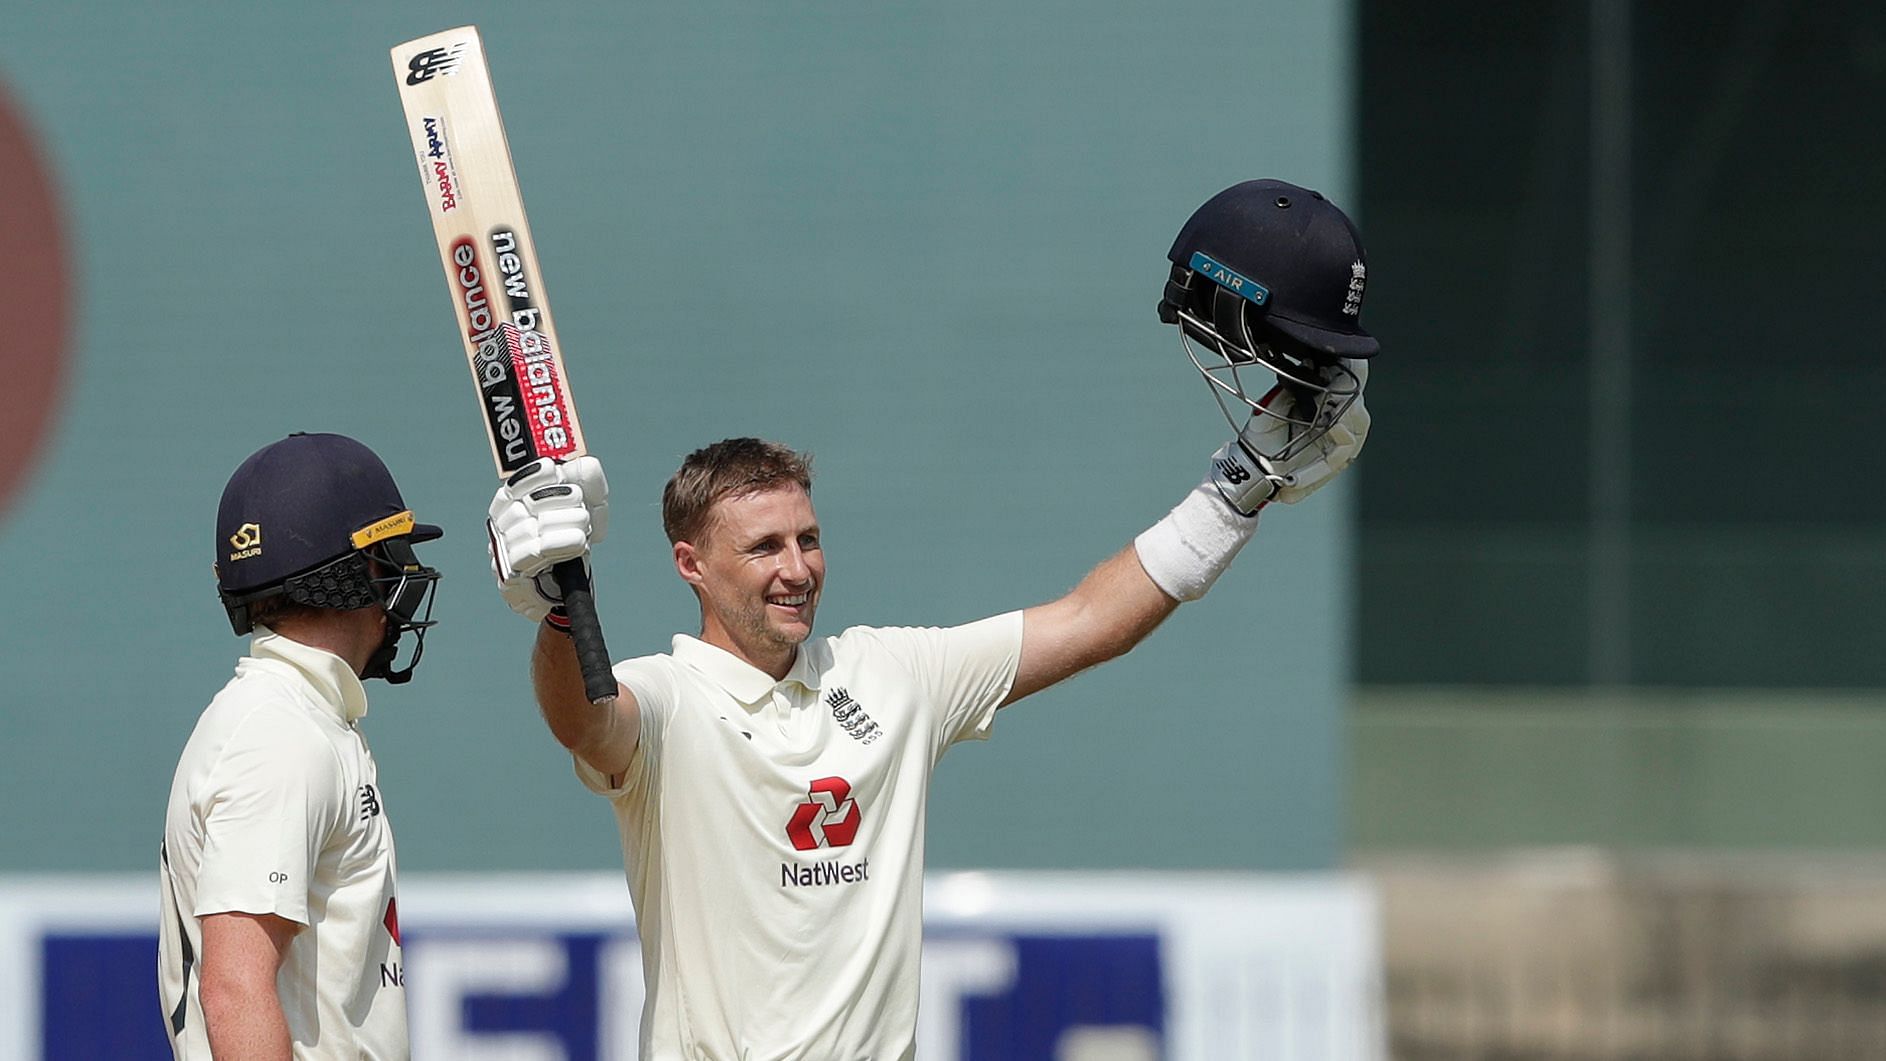 Joe Root made his Test debut in India in 2012 and has since scored 842 runs in 7 matches in this country.